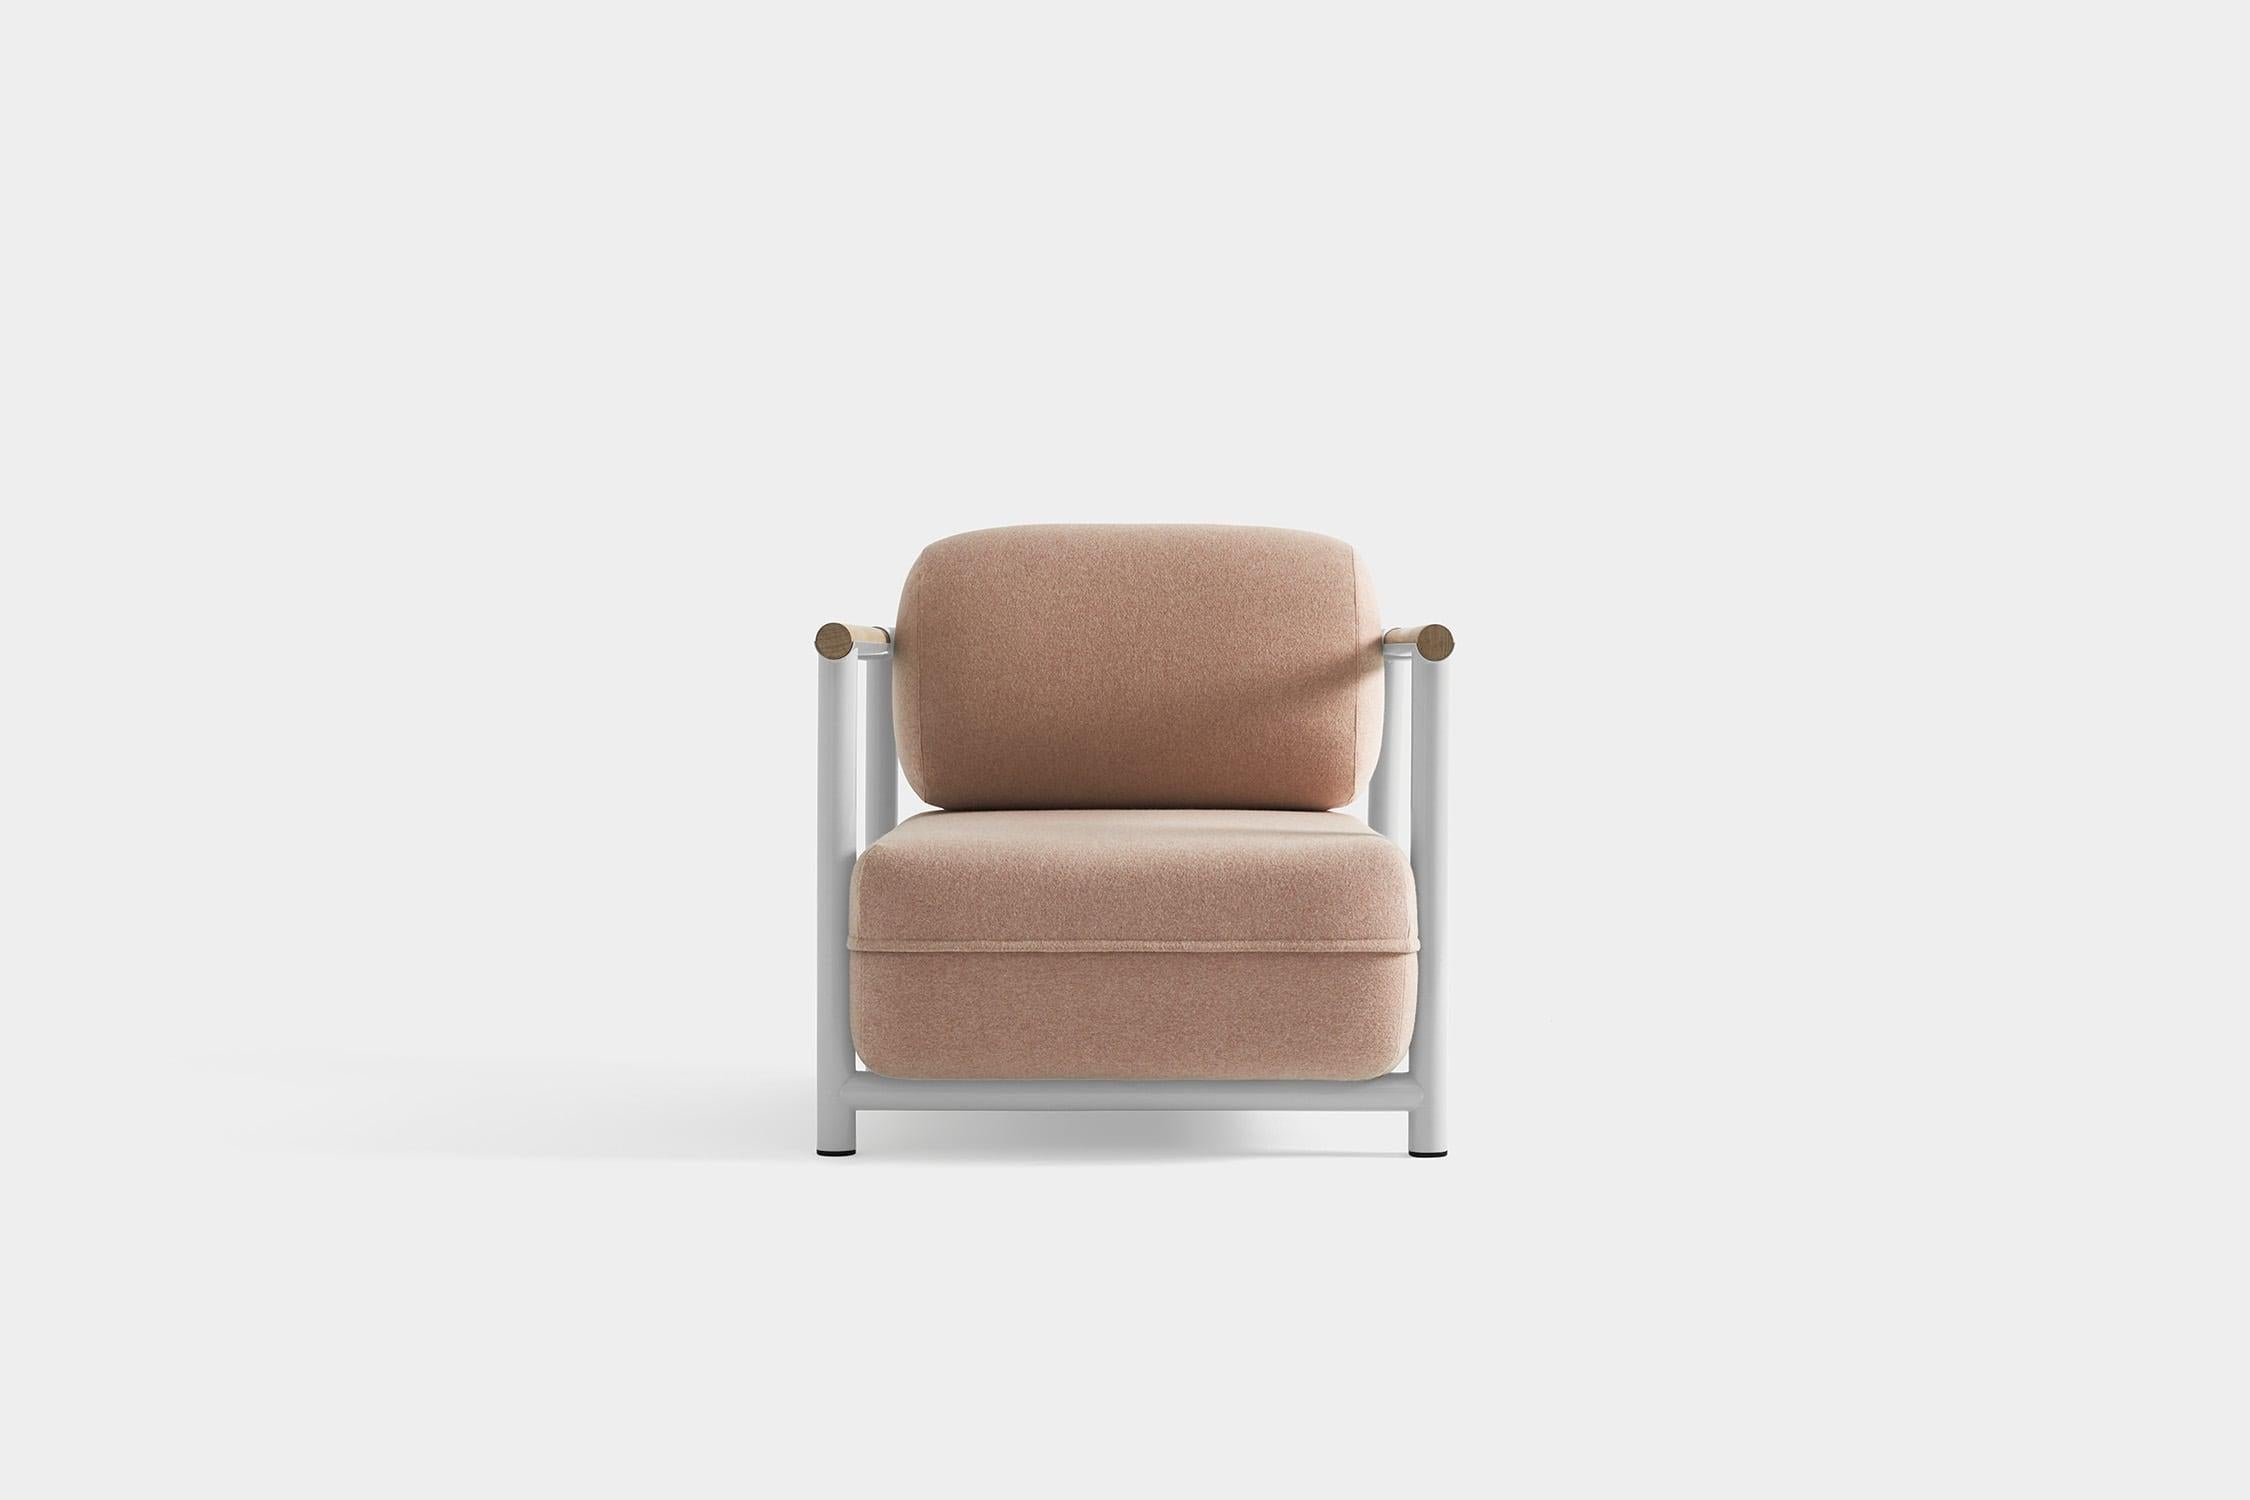 Bamboo Indoor Armchair by Pepe Albargues
Dimensions: W 80 x D 93 x H 83 cm
Materials: Iron, bench wood, pine wood

Variations of materials are avaliable

Bamboo is a collection made up of an armchair and a sofa inspired on bamboo forests. Its